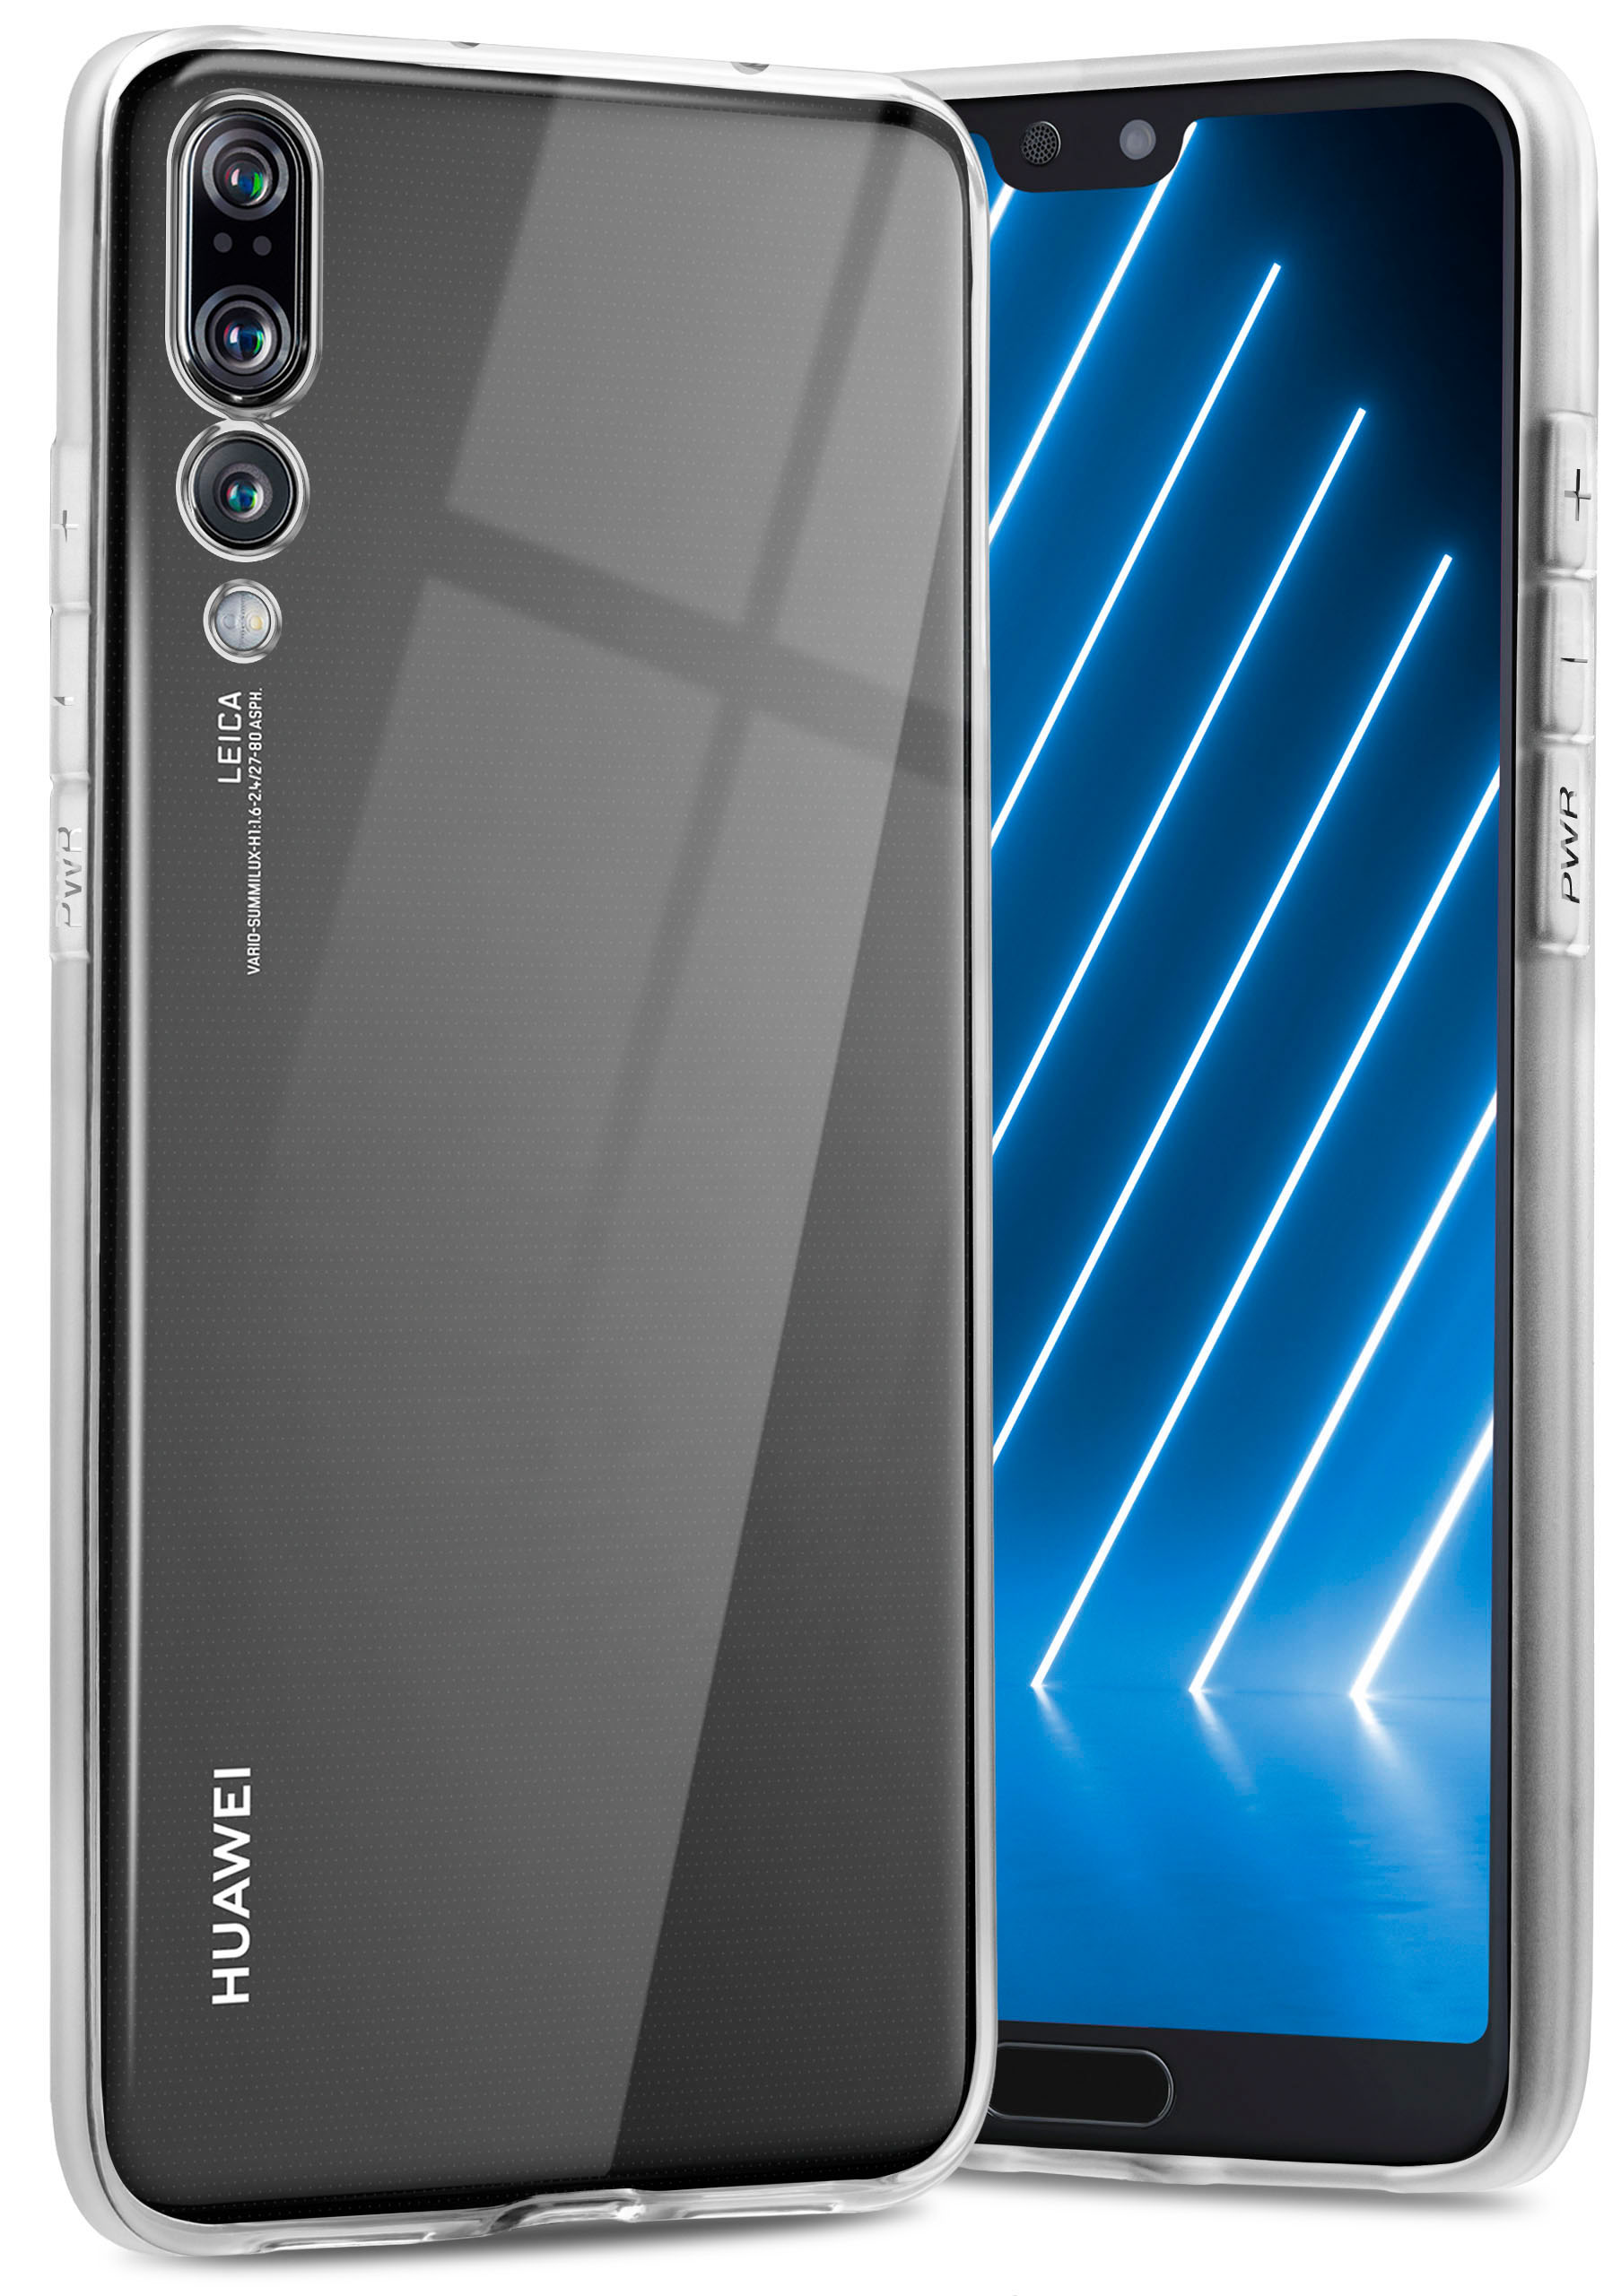 ONEFLOW Clear Case, Backcover, Huawei, Pro, P20 Crystal-Clear